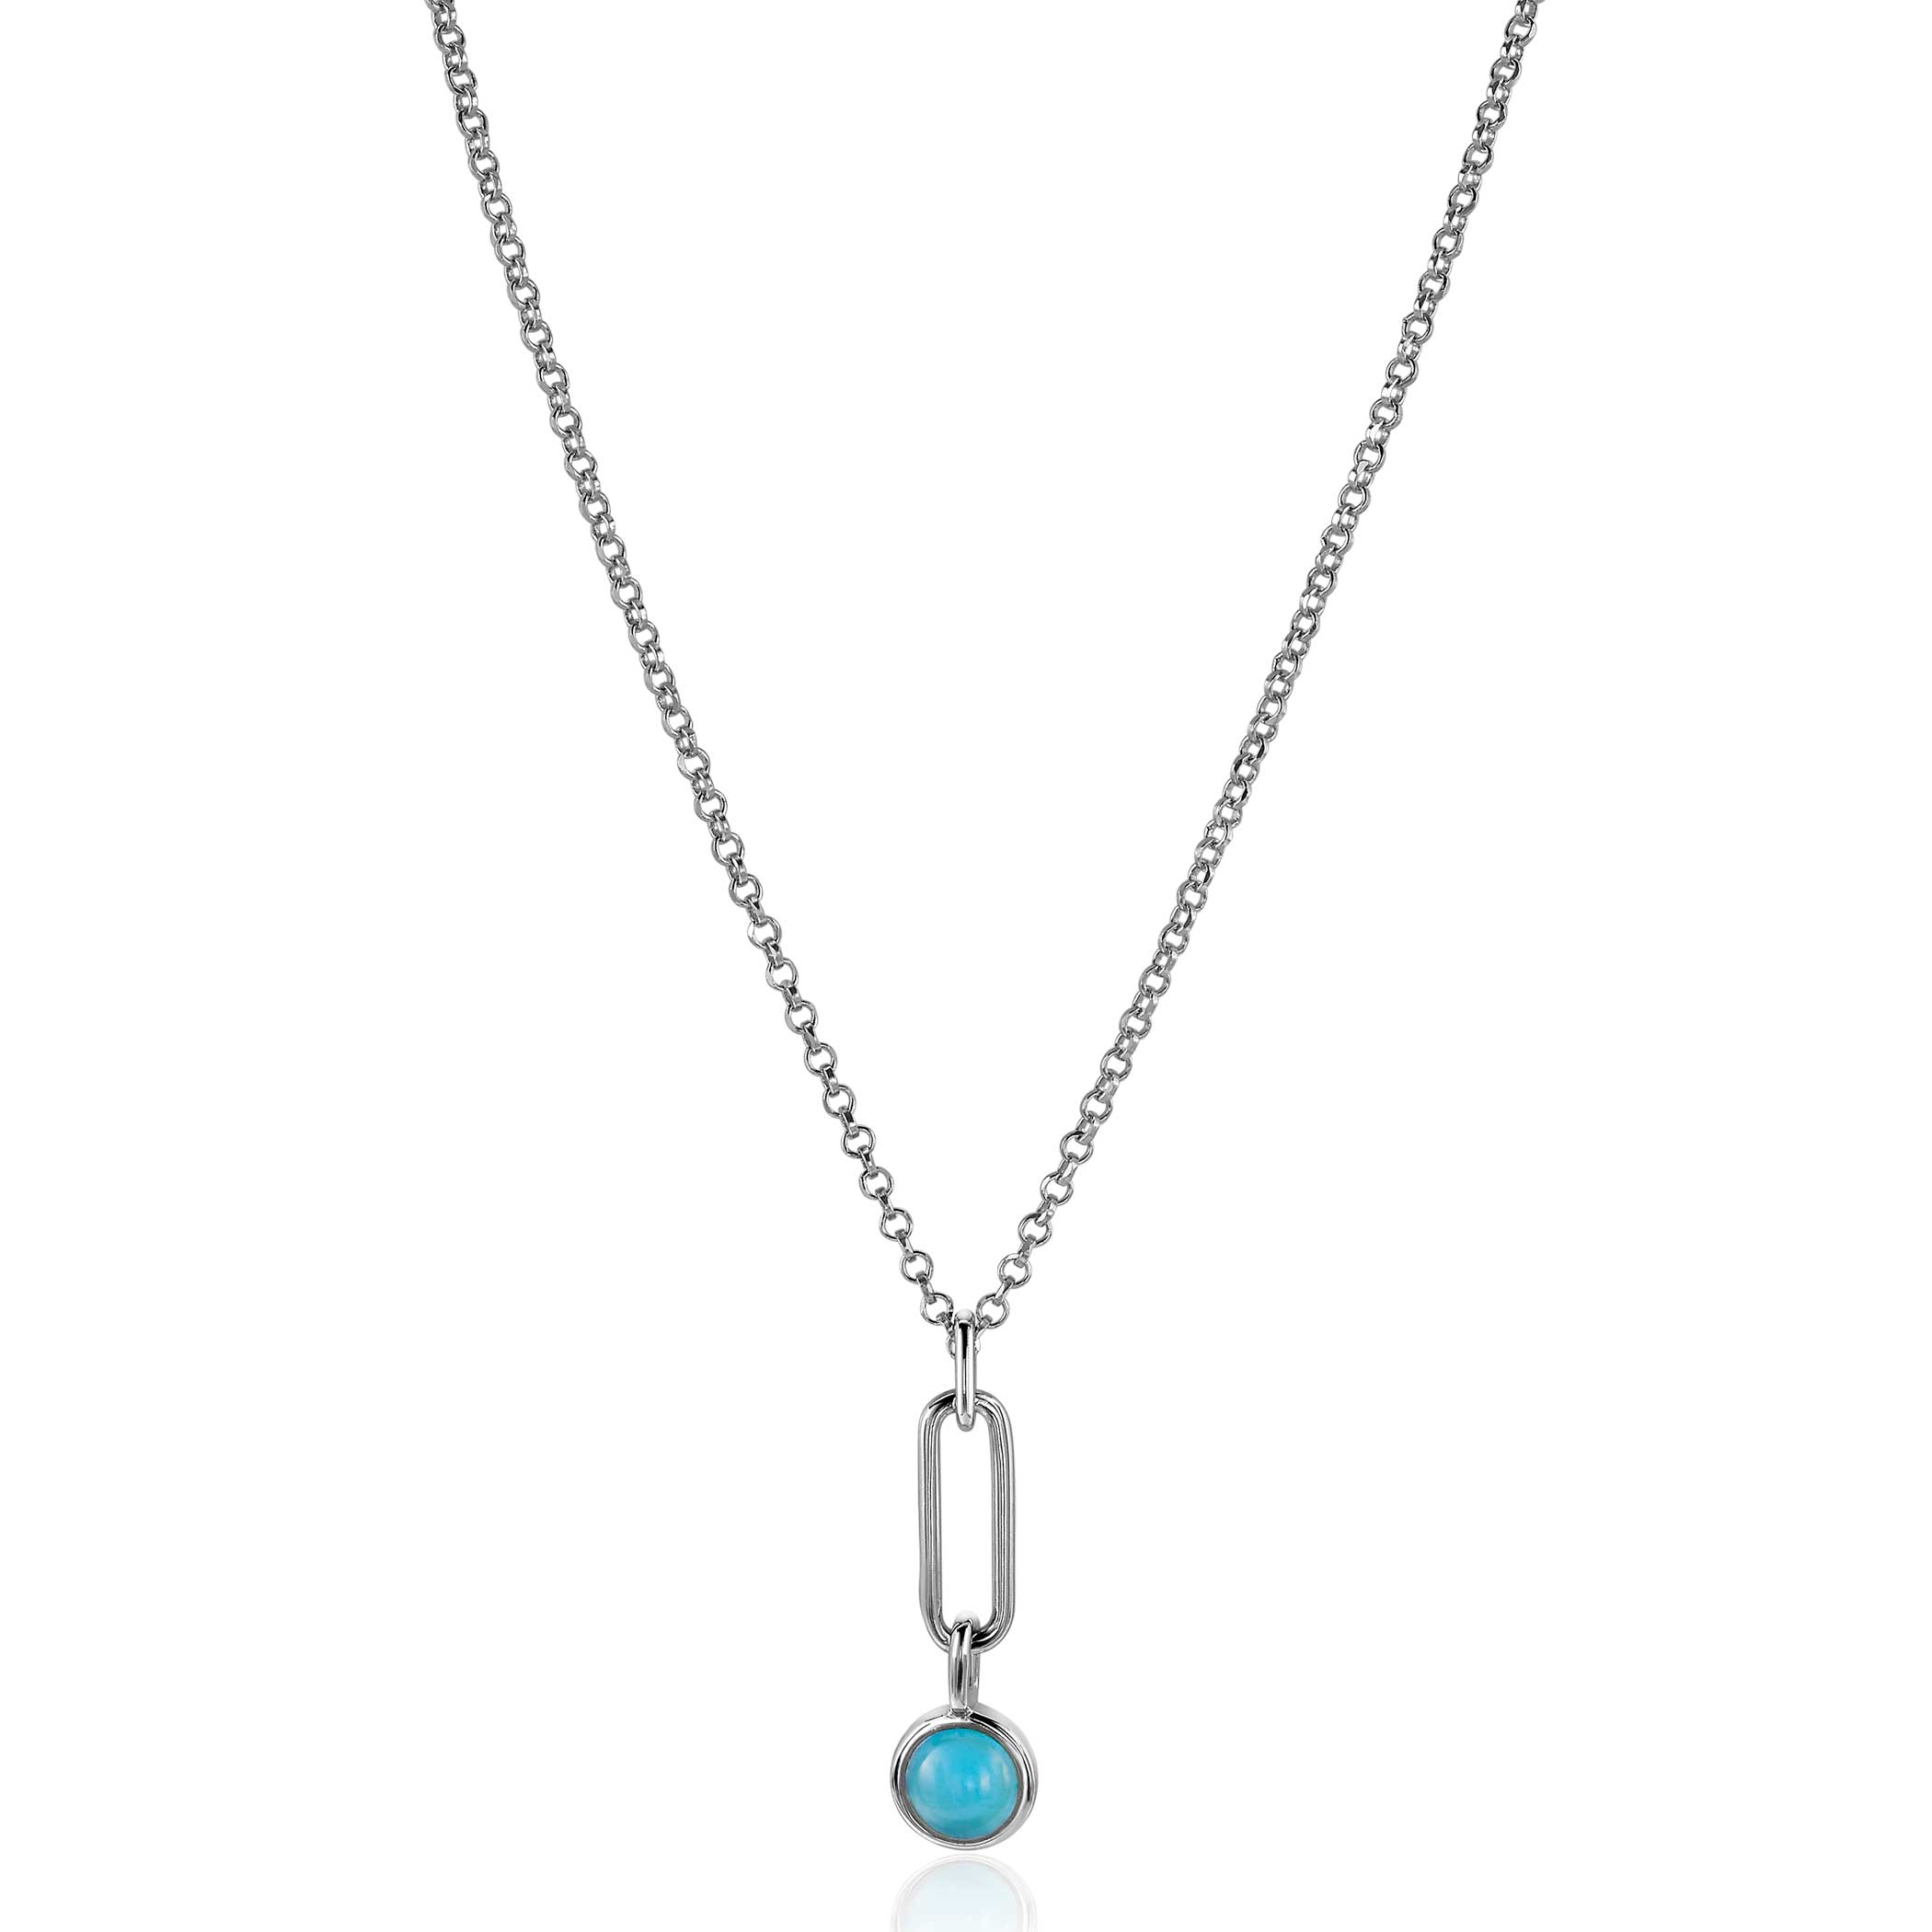 26mm ZINZI Sterling Silver Pendant Paperclip Chain Round Turquoise Blue ZIH2173 (excl. necklace)